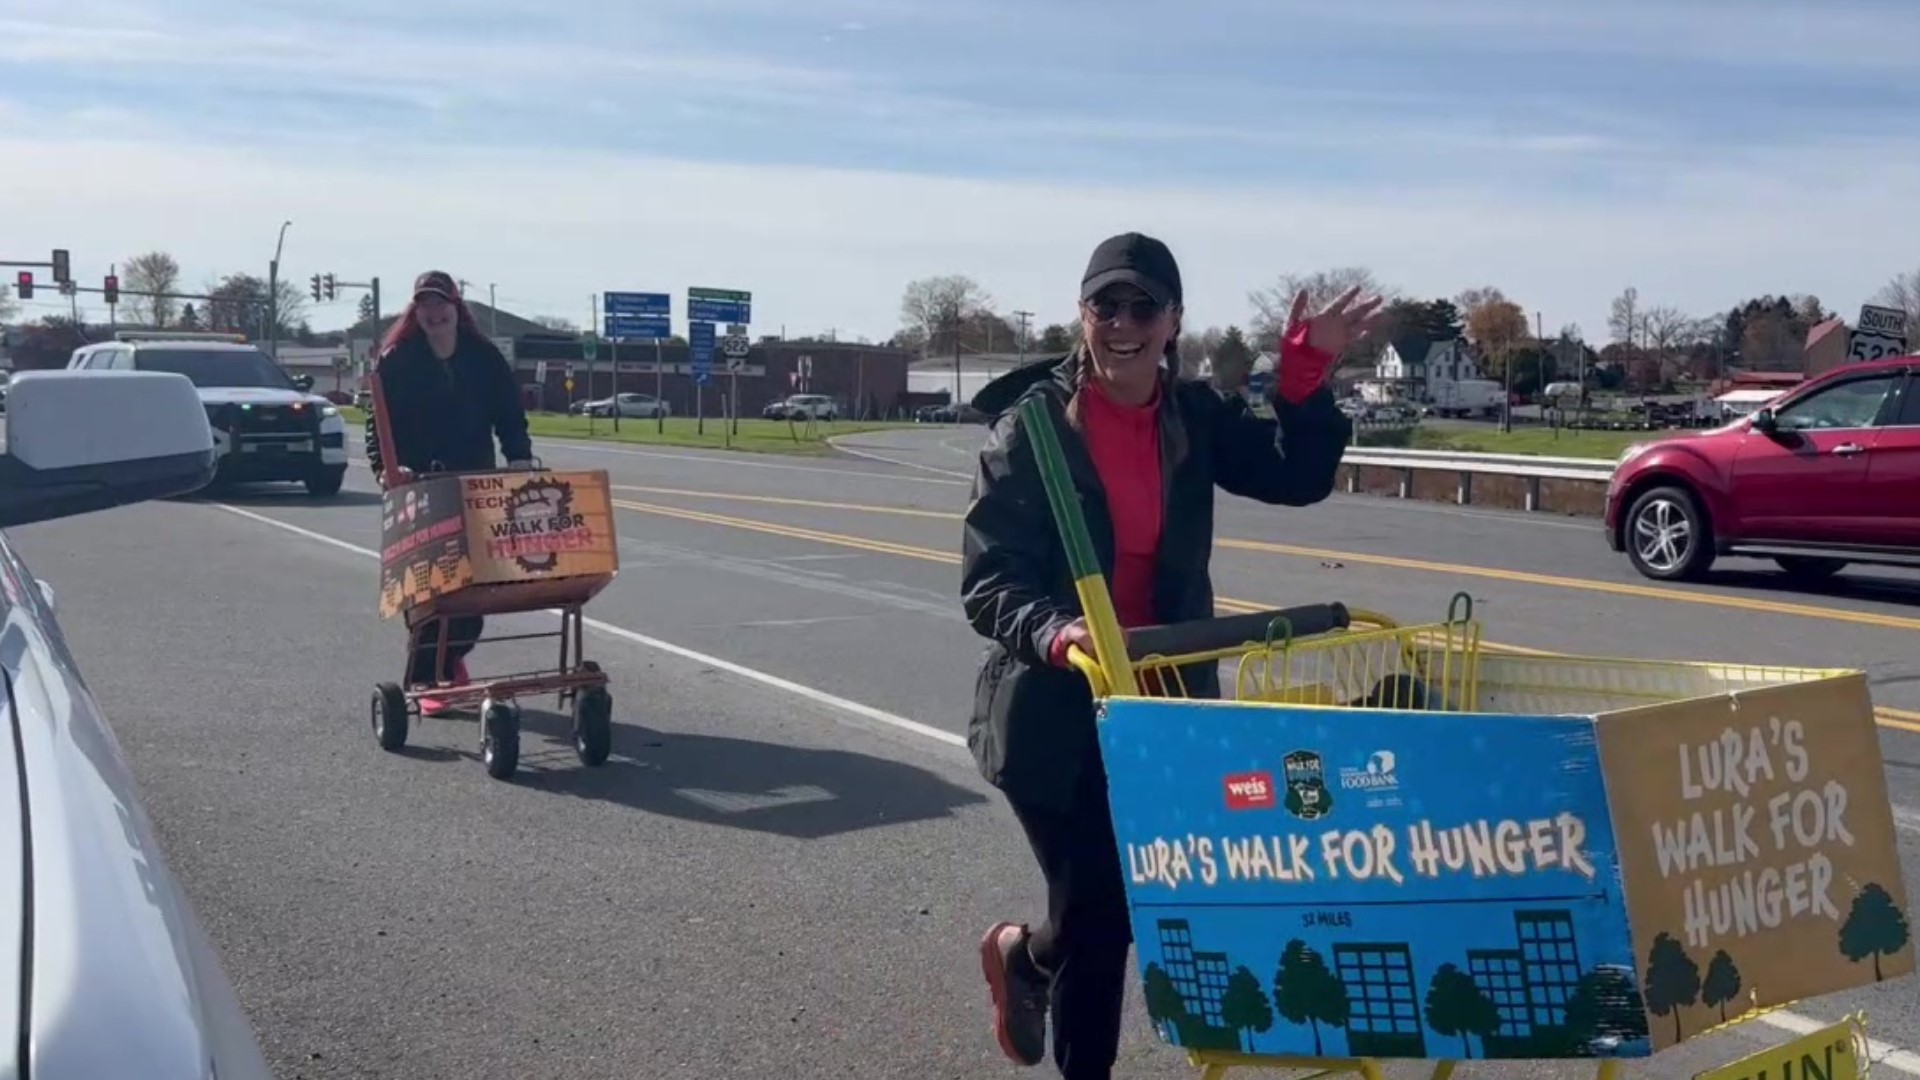 Two radio personalities hope to help the hungry by raising money for an area food bank. Newswatch 16's Nikki Krize caught up with Lura and Shelly on their walk.